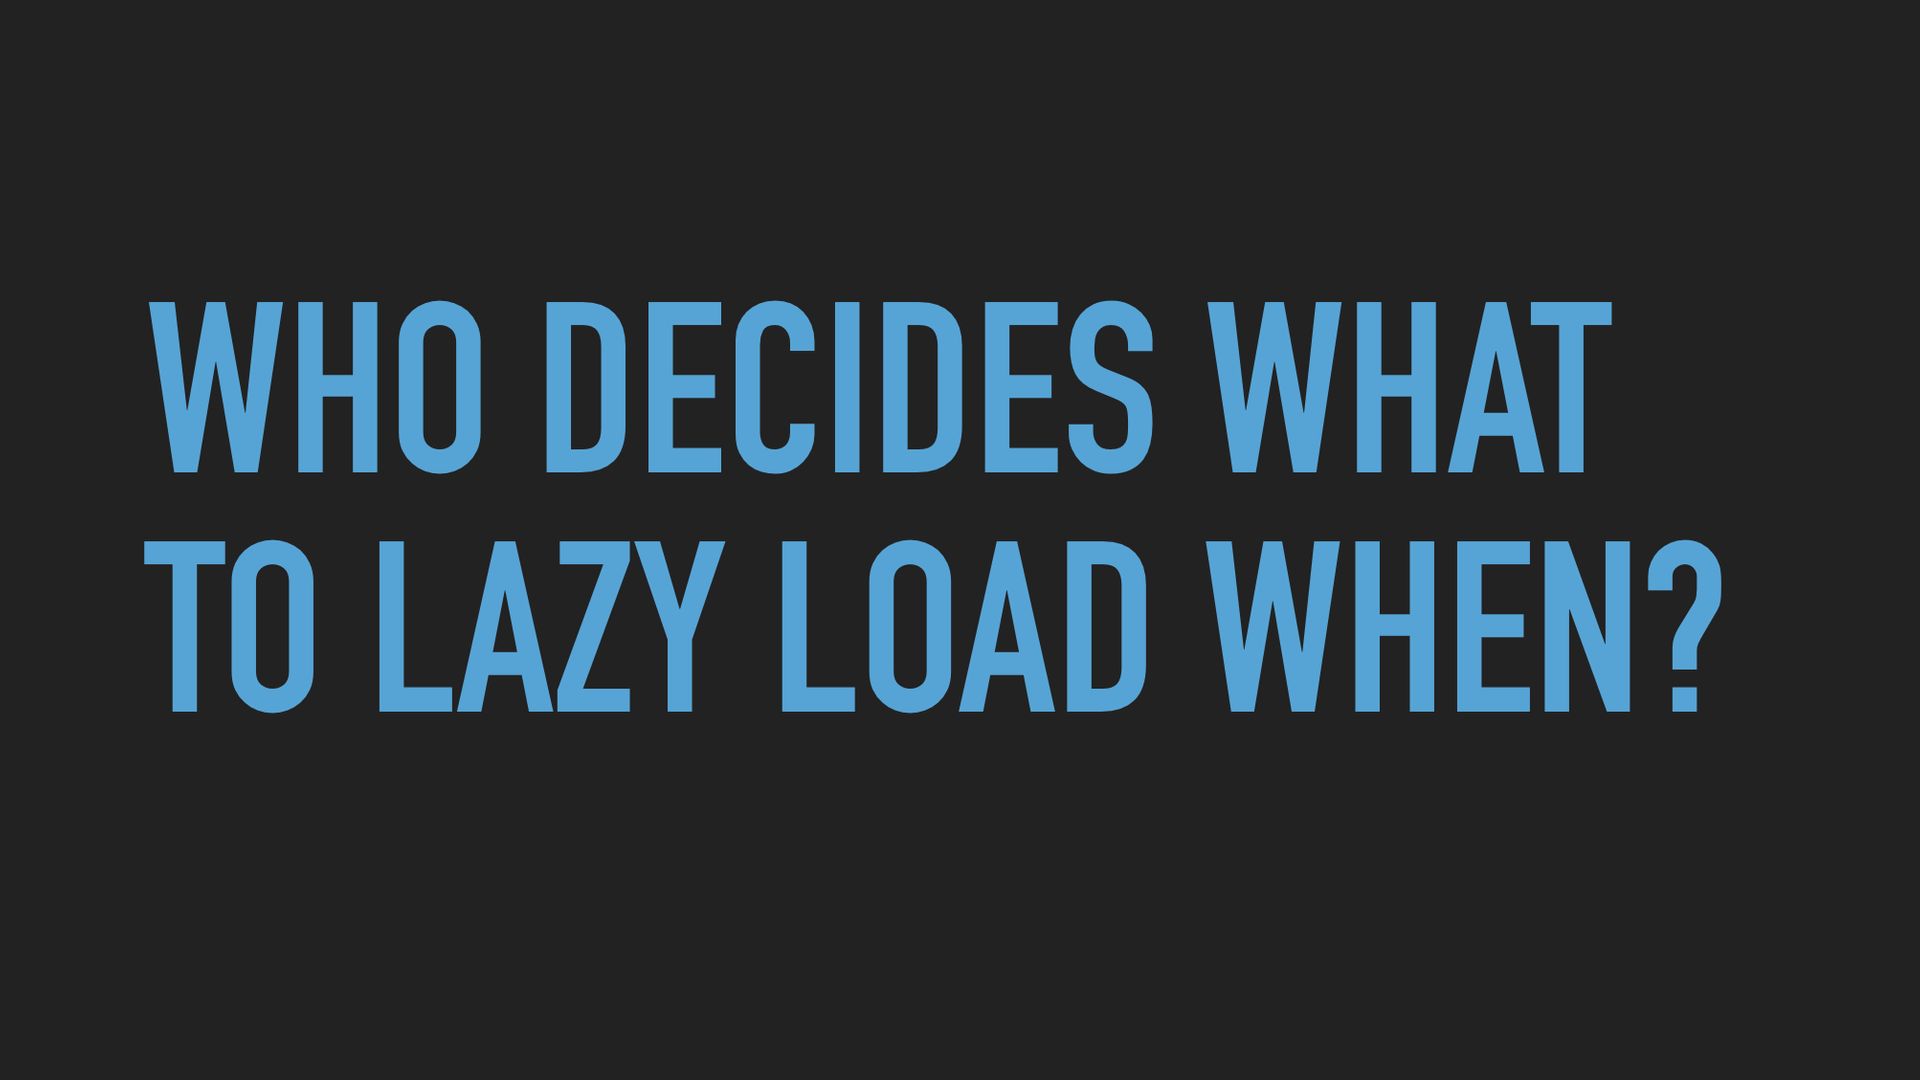 Slide text: Who decides what to lazy load when?